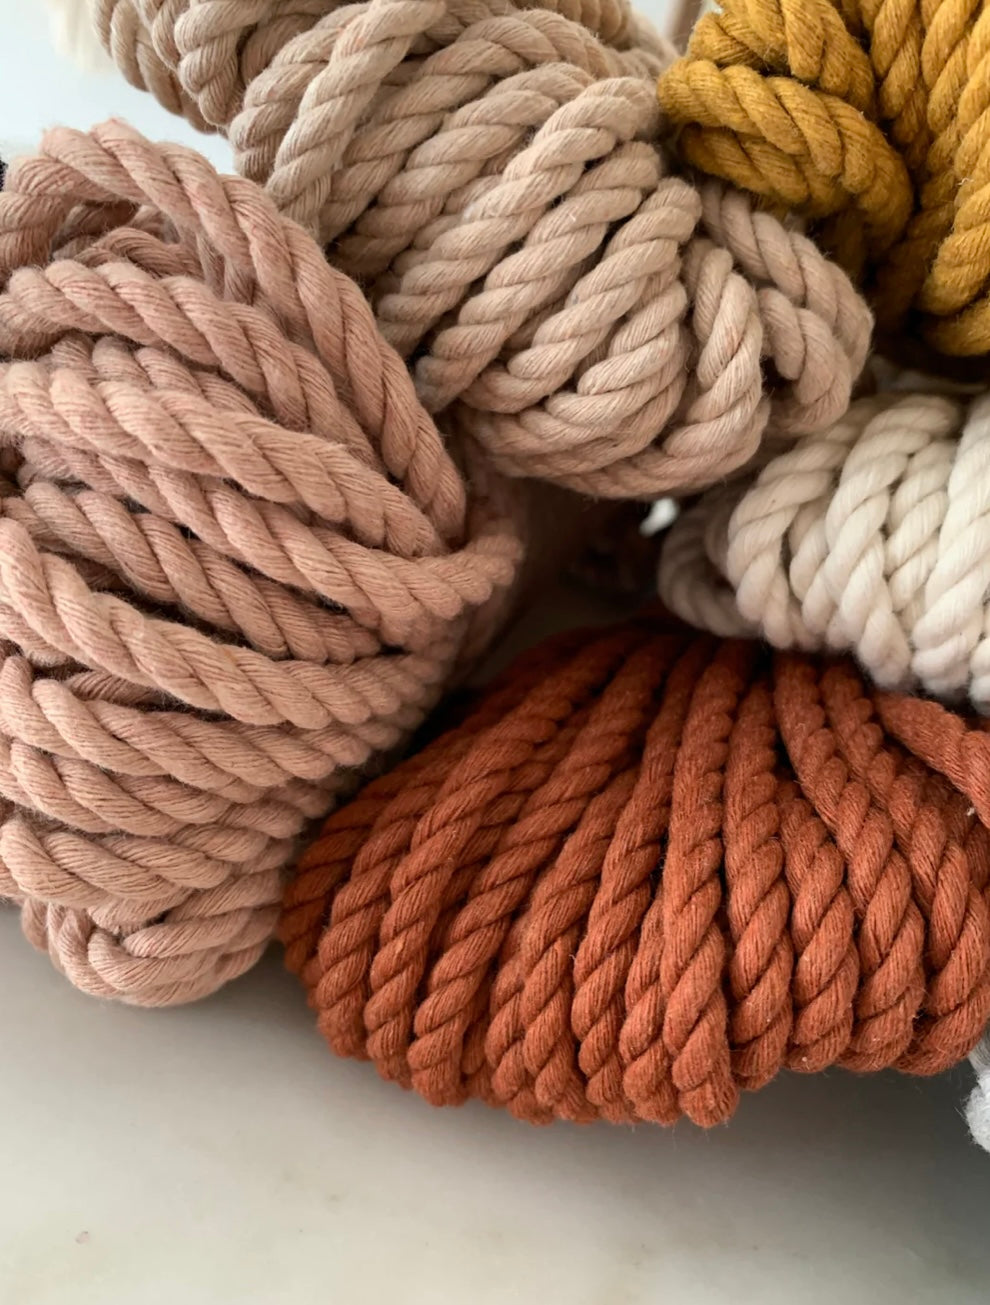 5mm 100% Cotton Rope Bundles – CAREFREE CORDS